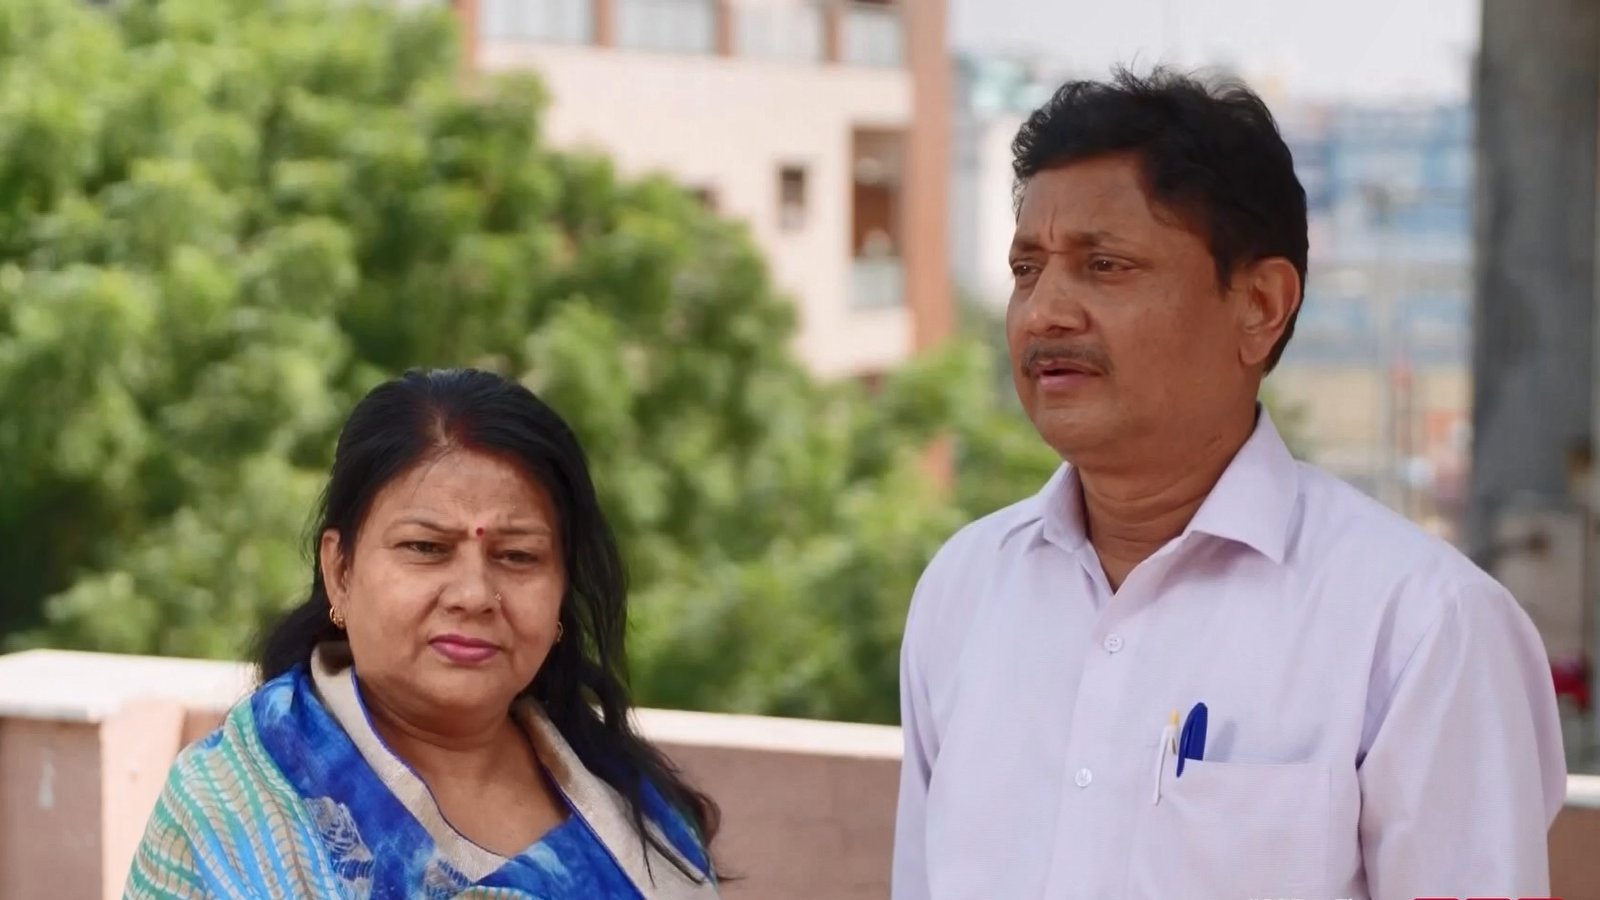 '90 Day Fiance The Other Way' recap Sumit's parents